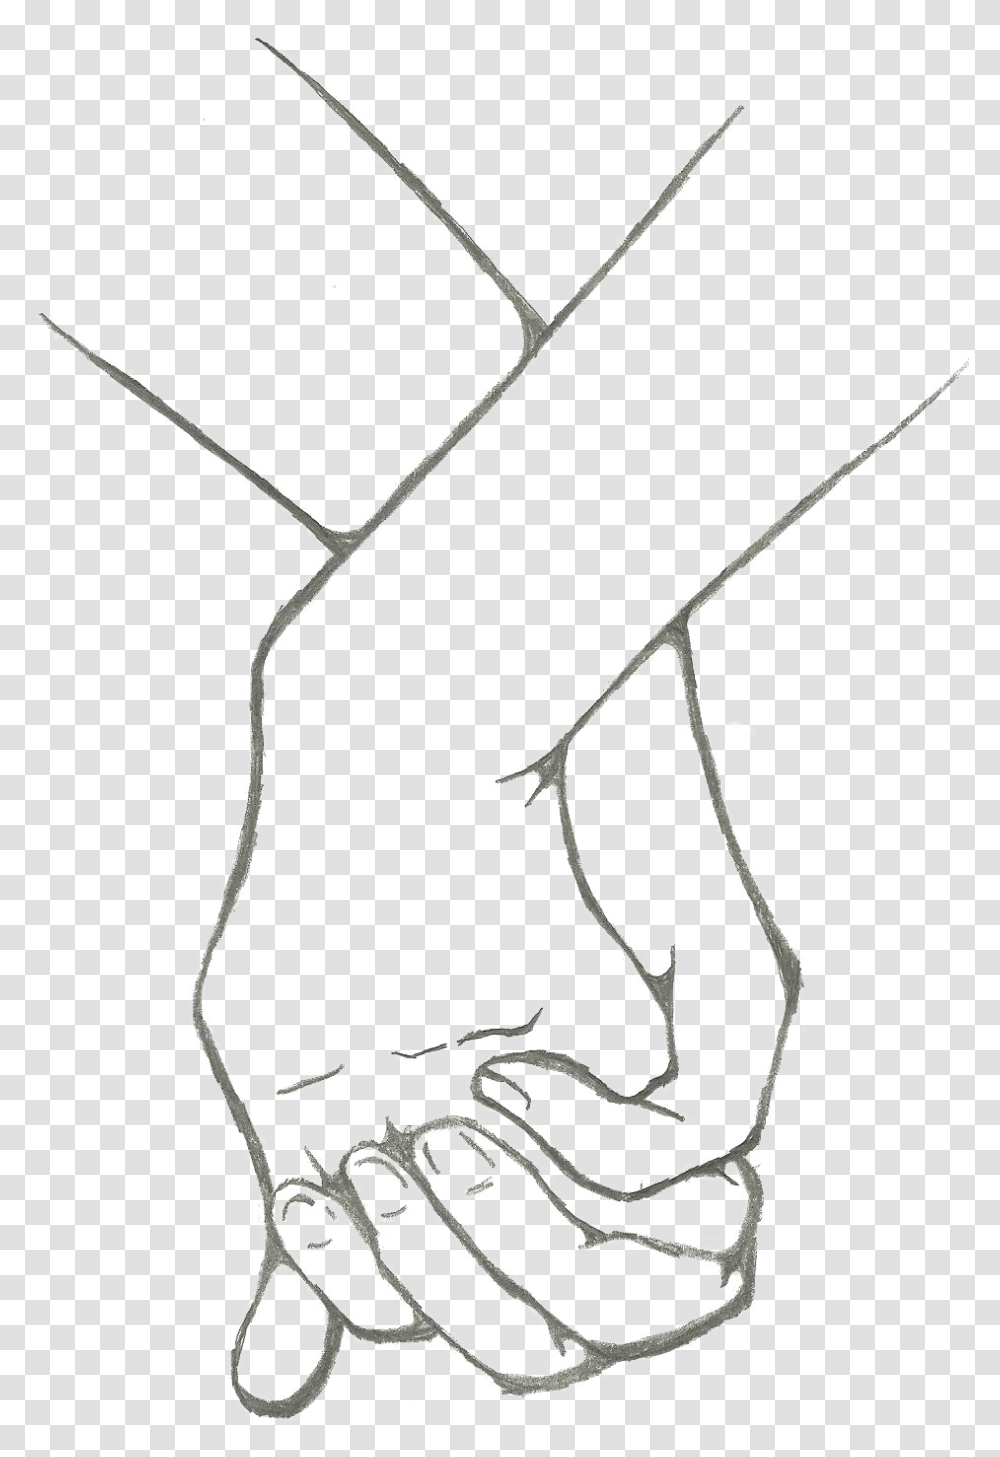 Holding Hands High Quality Image Hold Hand, Accessories, Accessory, Necklace, Jewelry Transparent Png